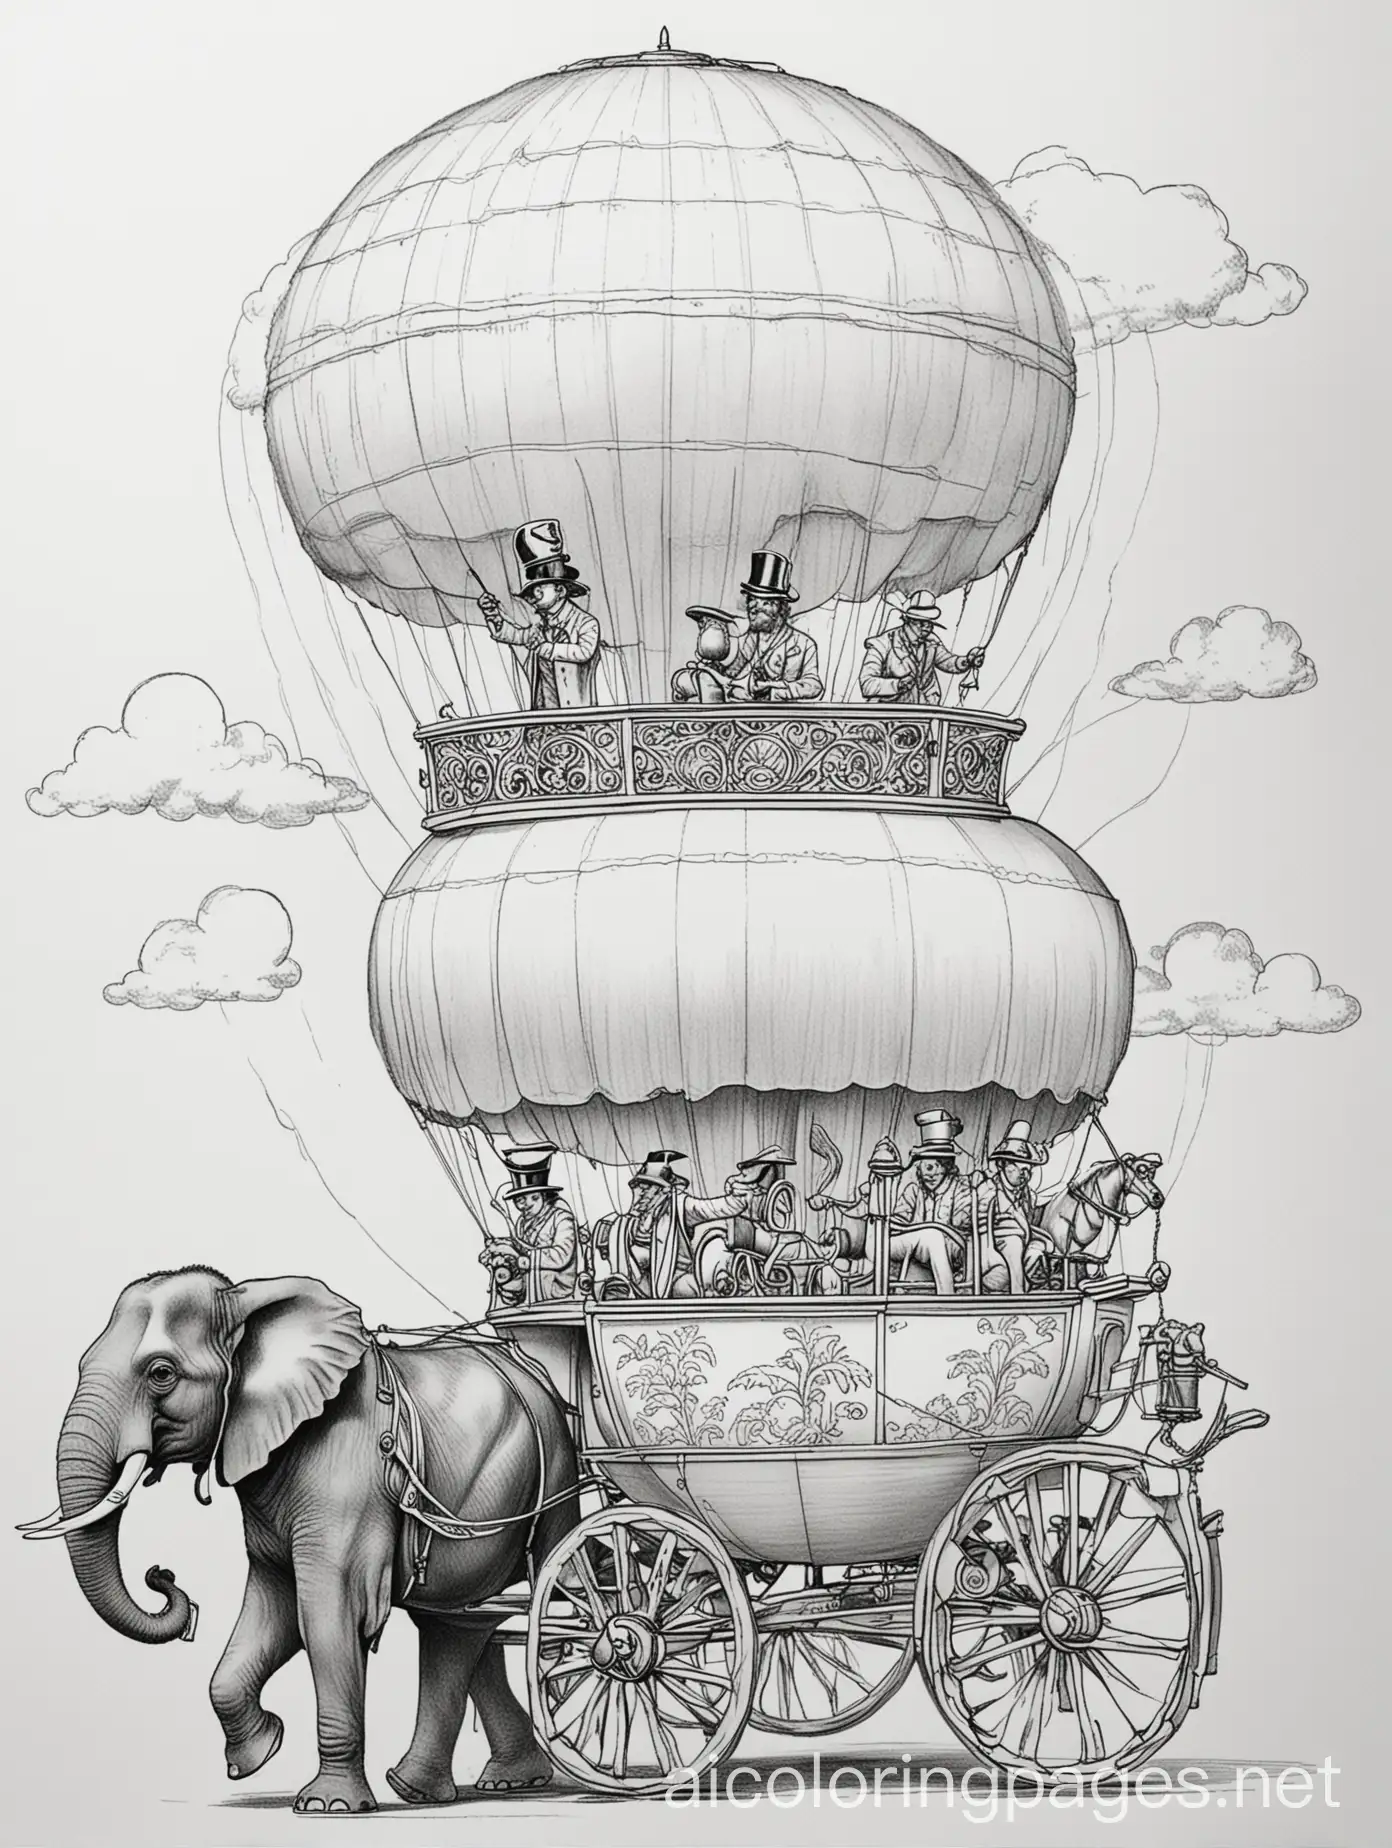 Vintage-Transportation-Coloring-Page-Steamer-Ship-Elephant-Ride-Hot-Air-Balloon-and-London-Townhouse